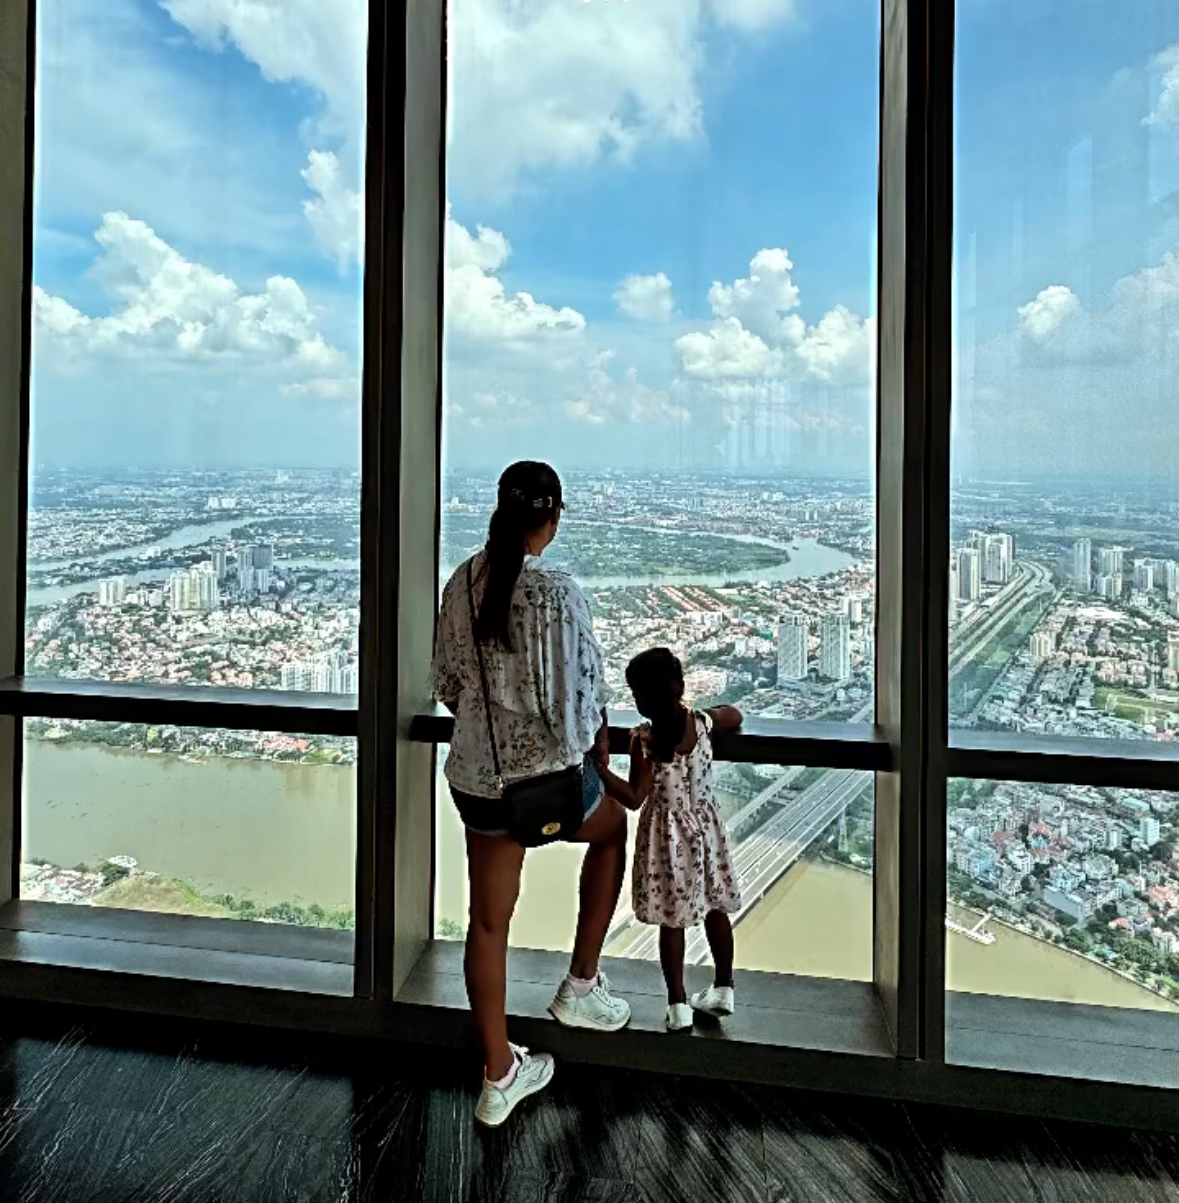 The Das family from the UK marvel at the Landmark 81 skyscraper in Ho Chi Minh City. Photo: Viola Das